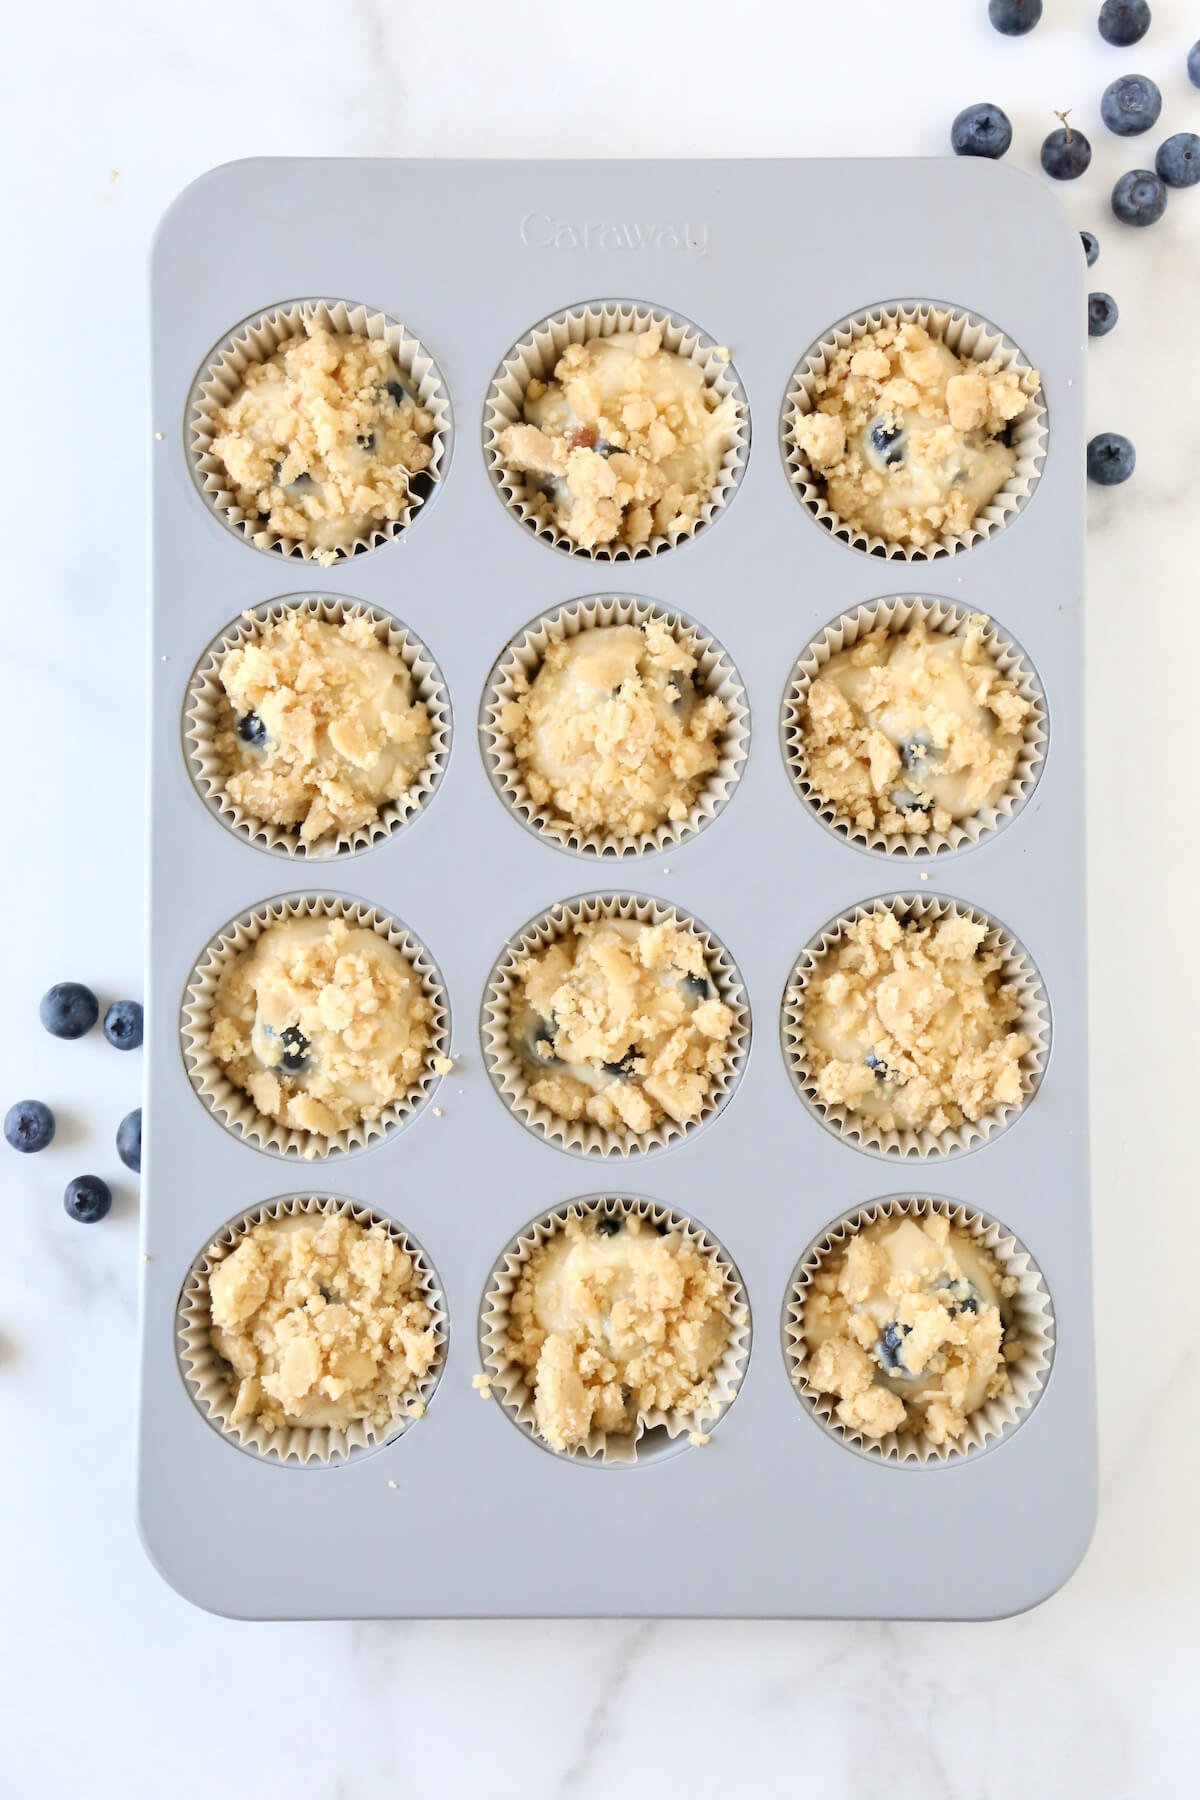 A muffin pan filled with batter and topped with crumble topping.  